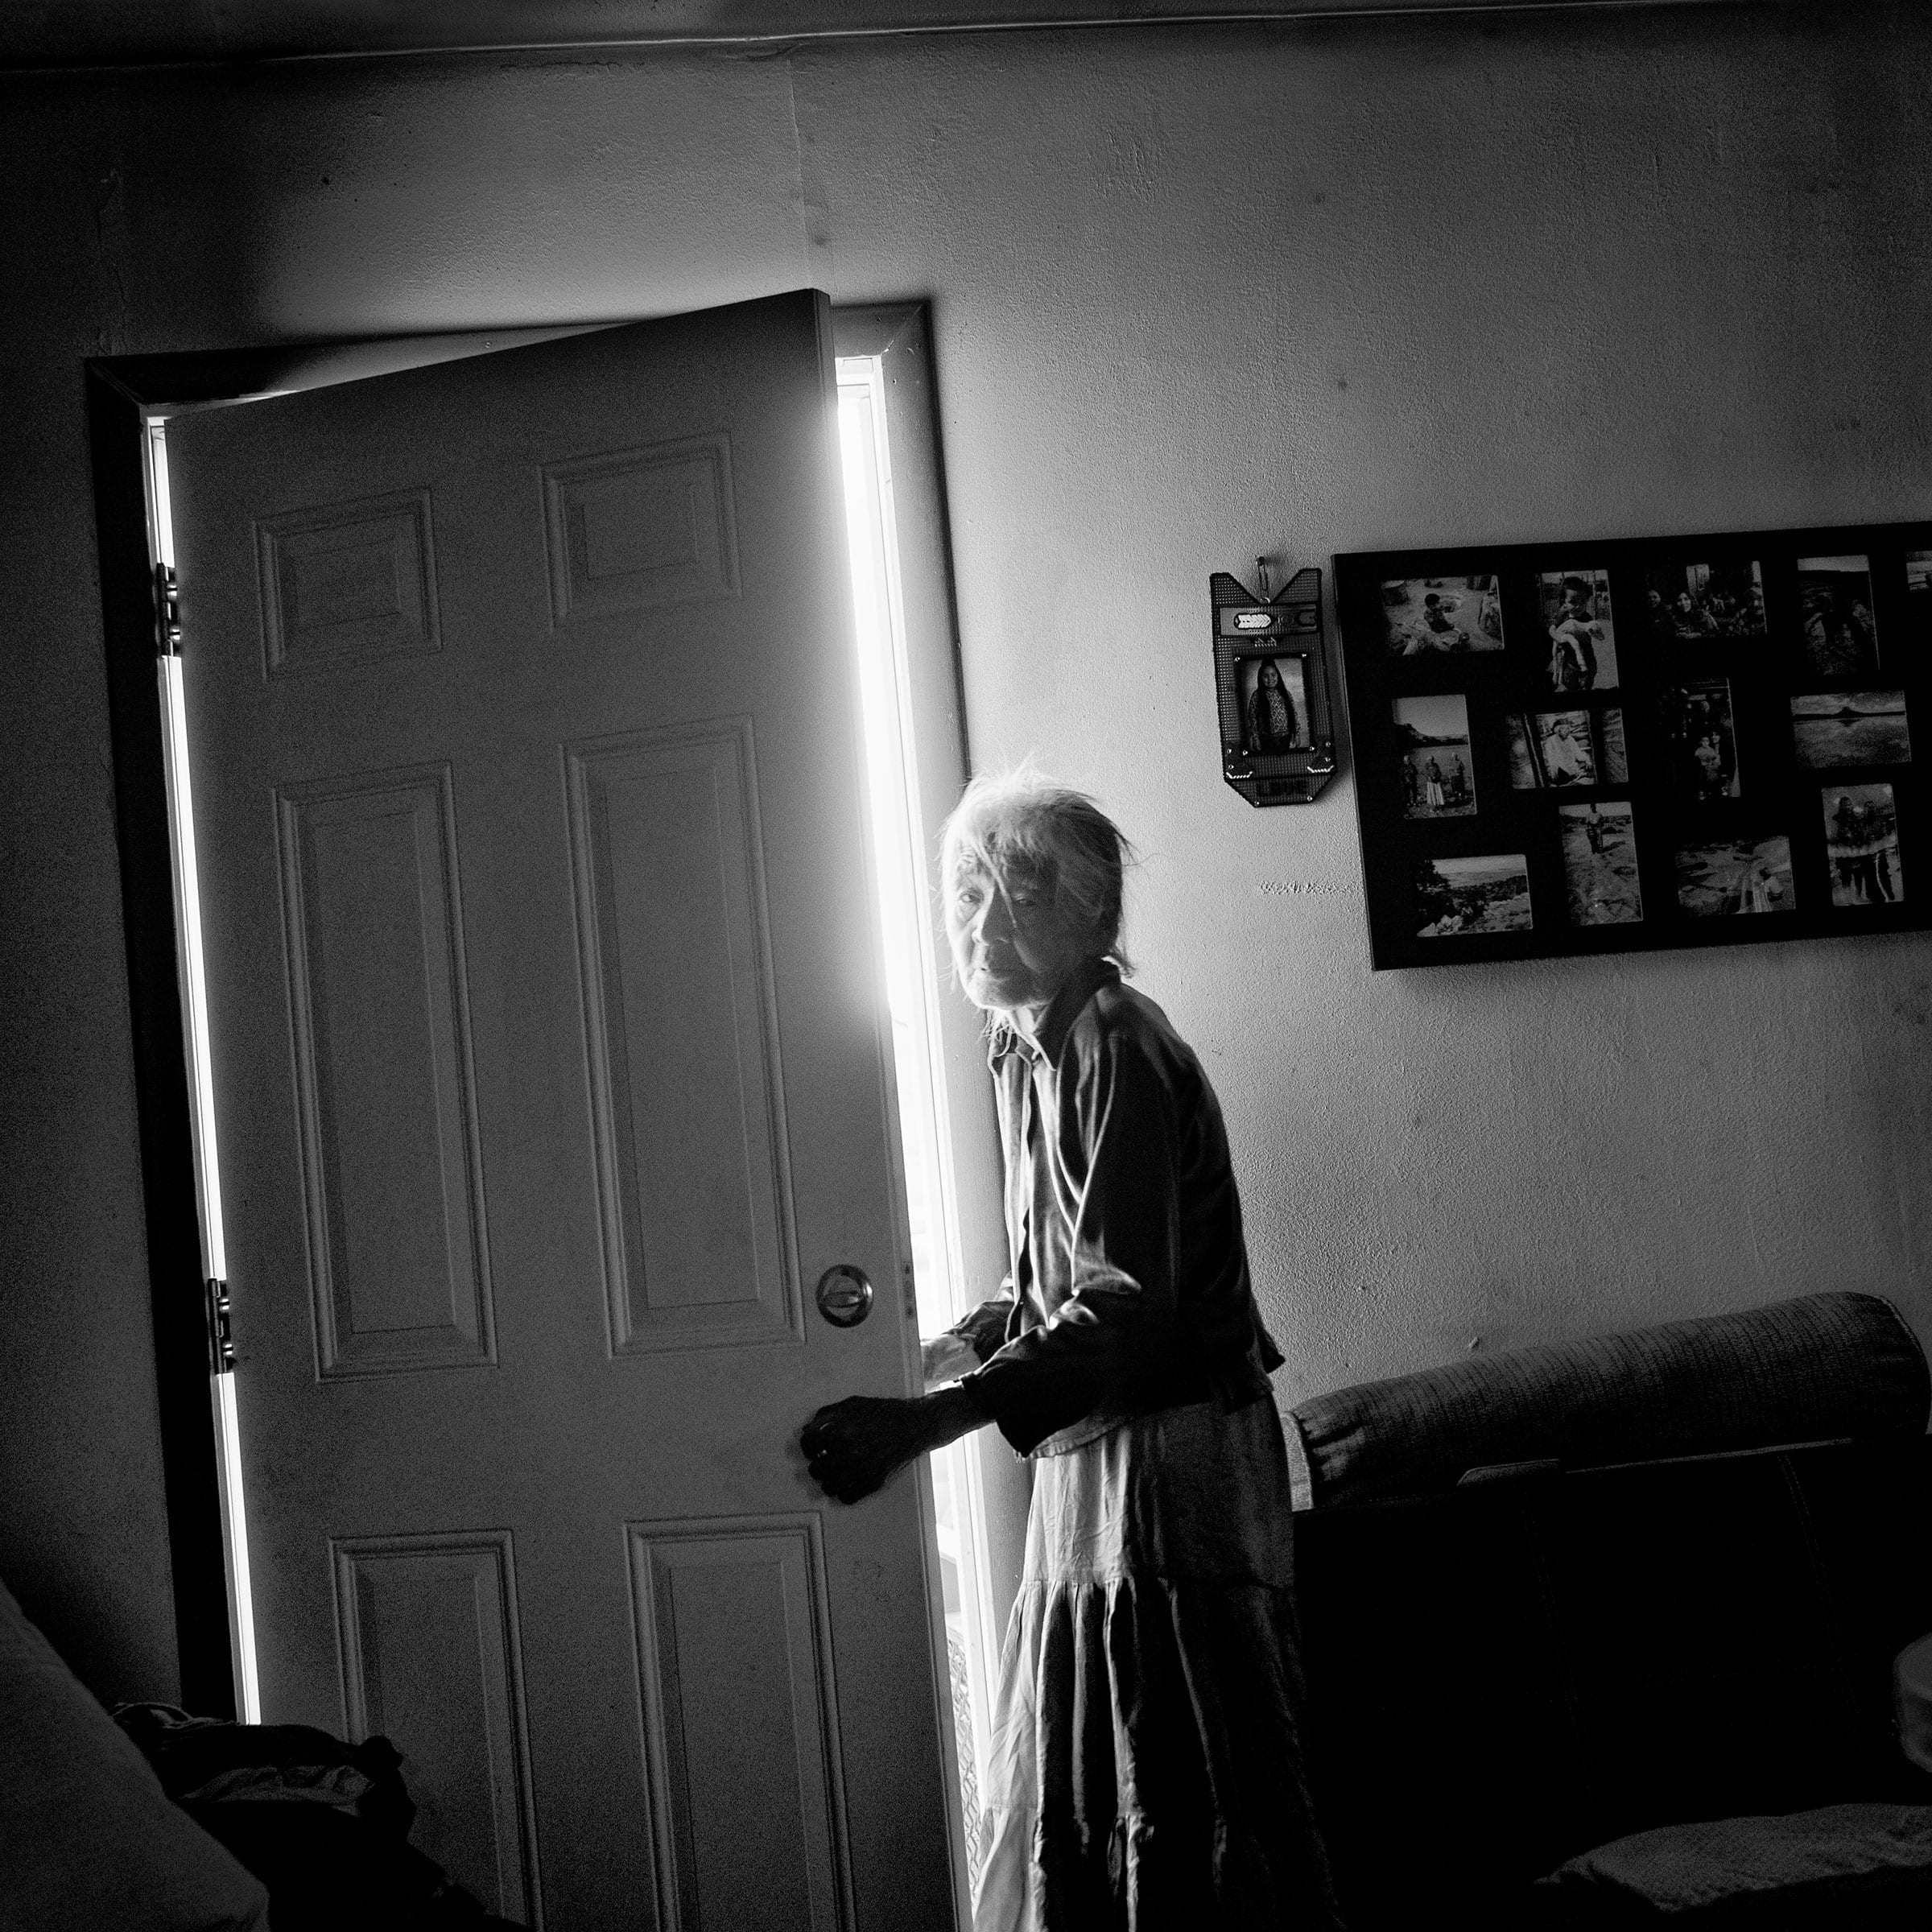 Nellie Yellowhorse, 90, at her family’s ranch home in the Navajo Nation; she lives with her two elderly sisters in the house, which has no running water.  Tapped Out,  March 2 issue.